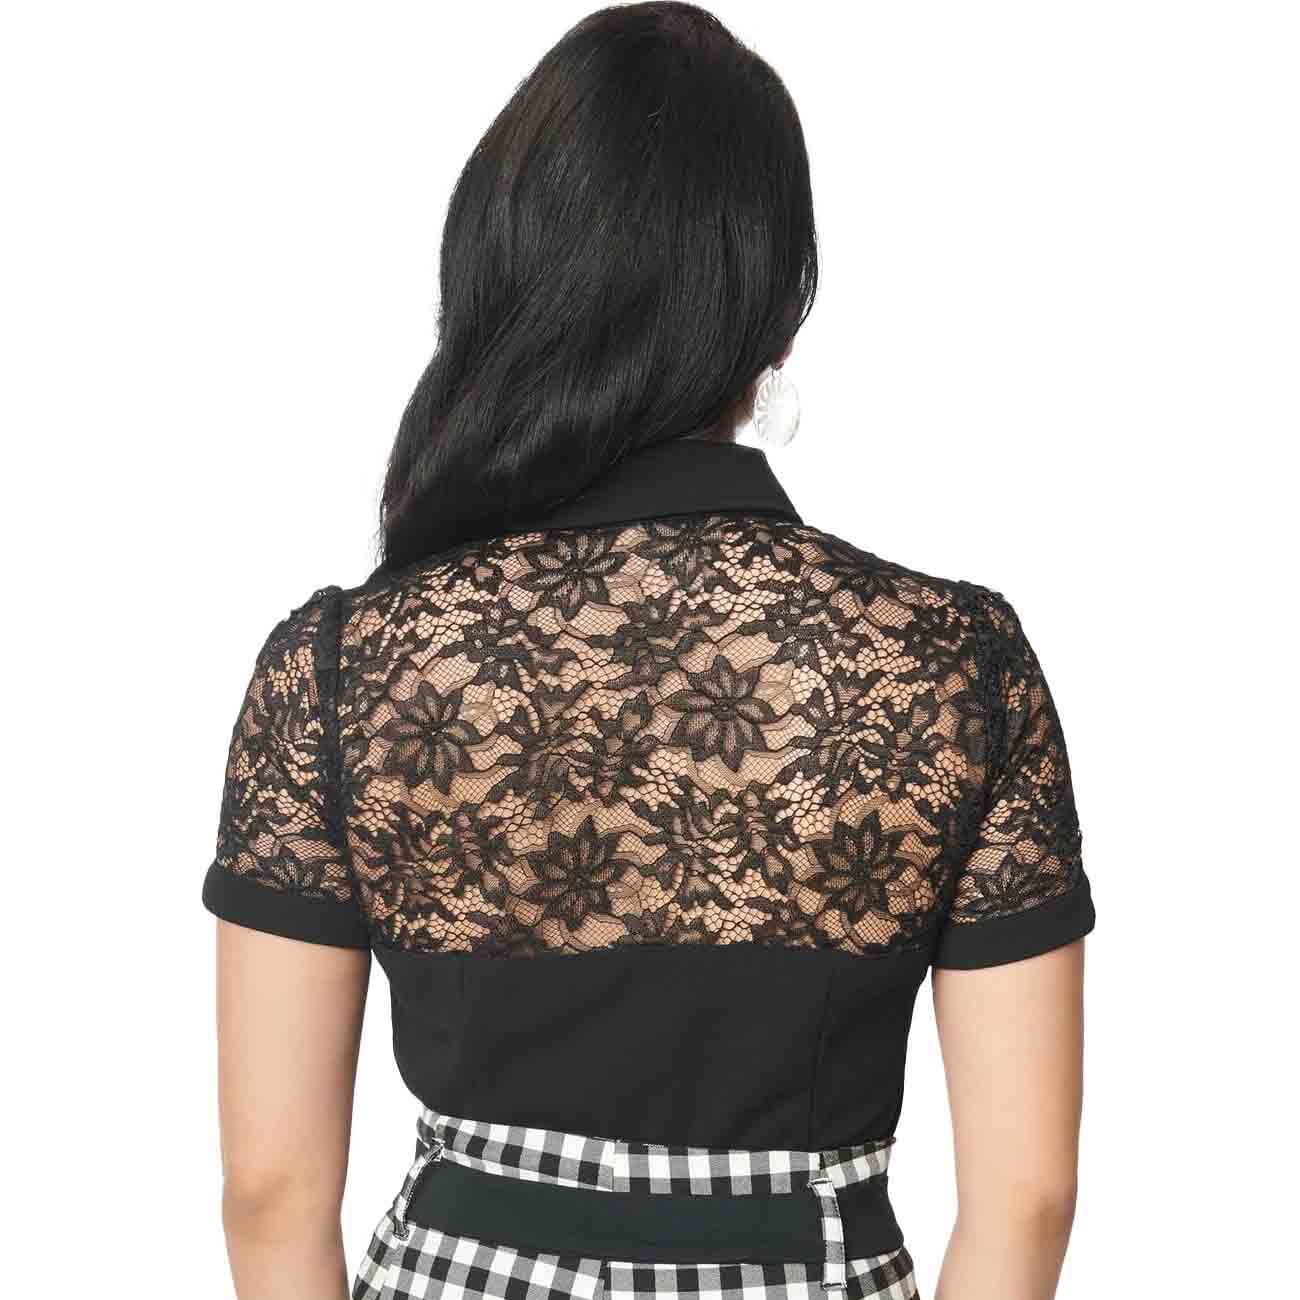 Back image of a retro black sheer lace blouse